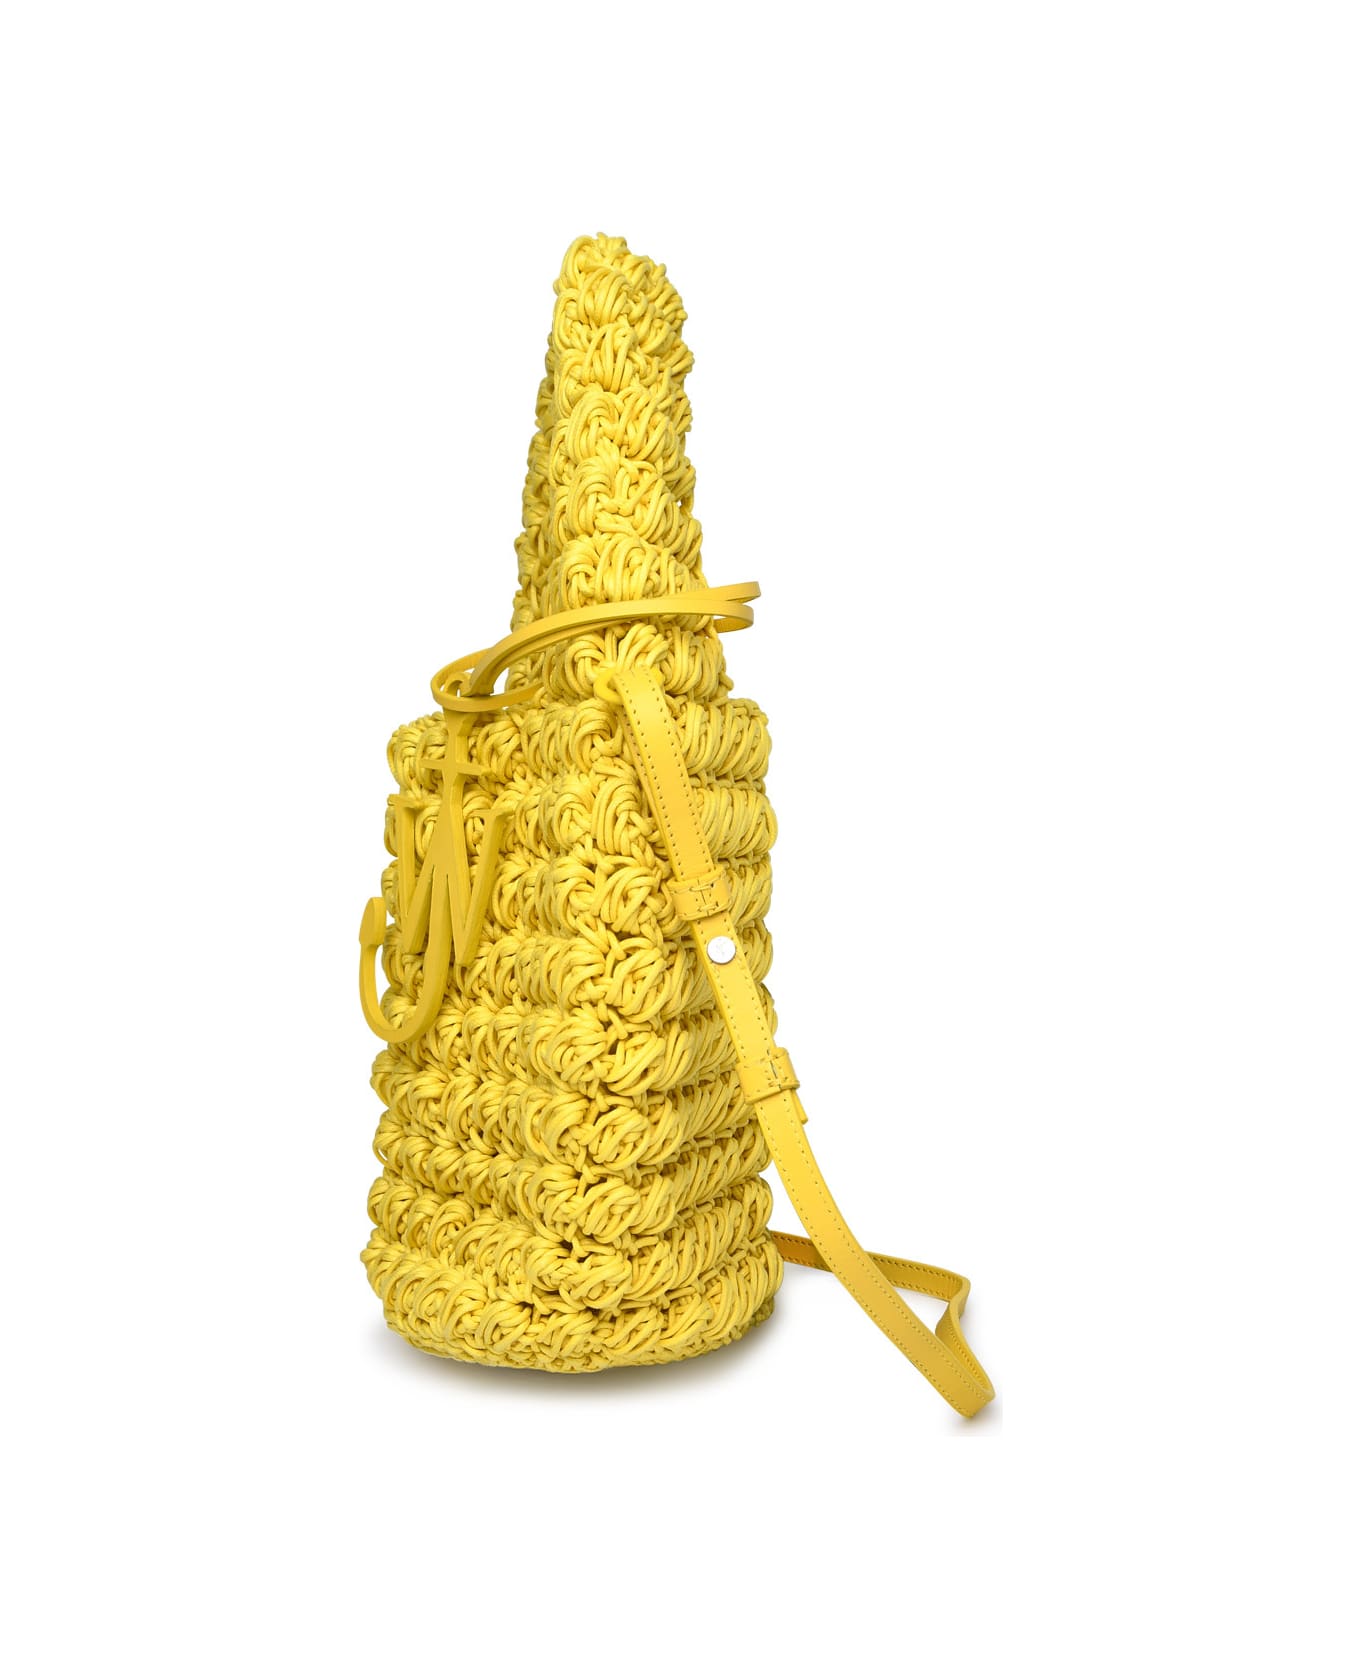 J.W. Anderson Yellow Woven Bag - Yellow トートバッグ